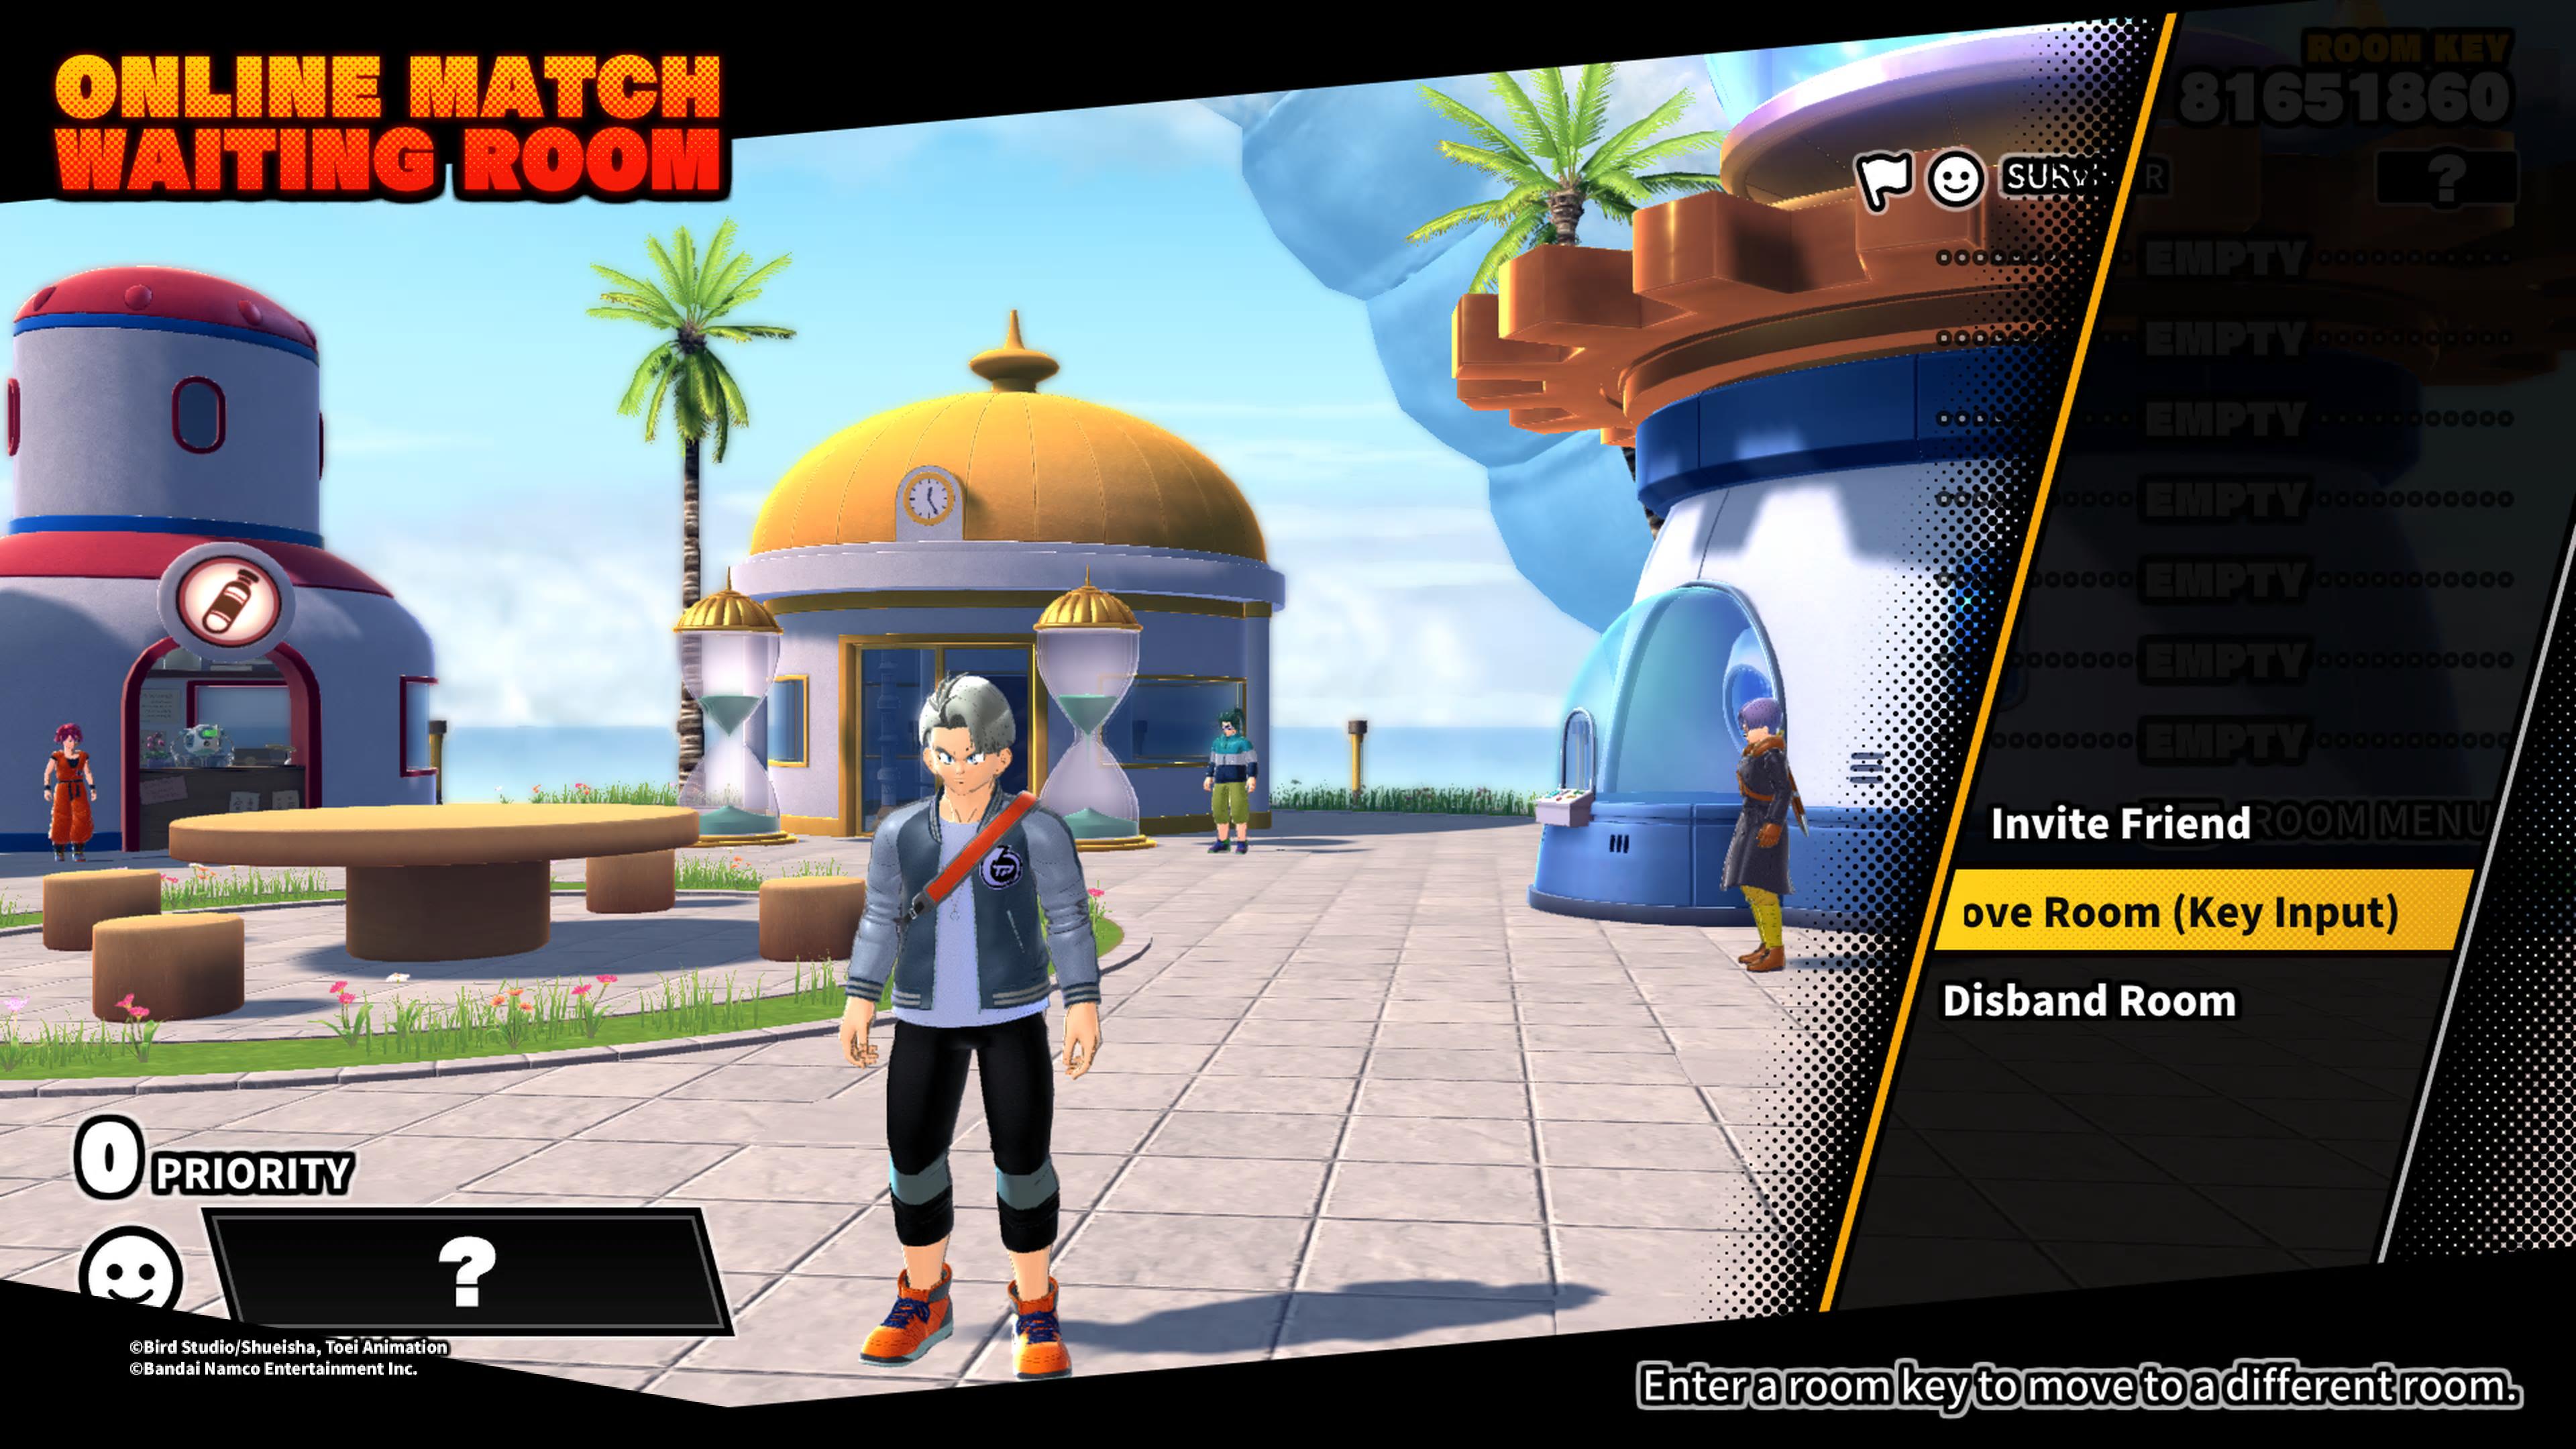 Dragon Ball: The Breakers - Steps on how to connect with friends, create a  room, cross-play and more